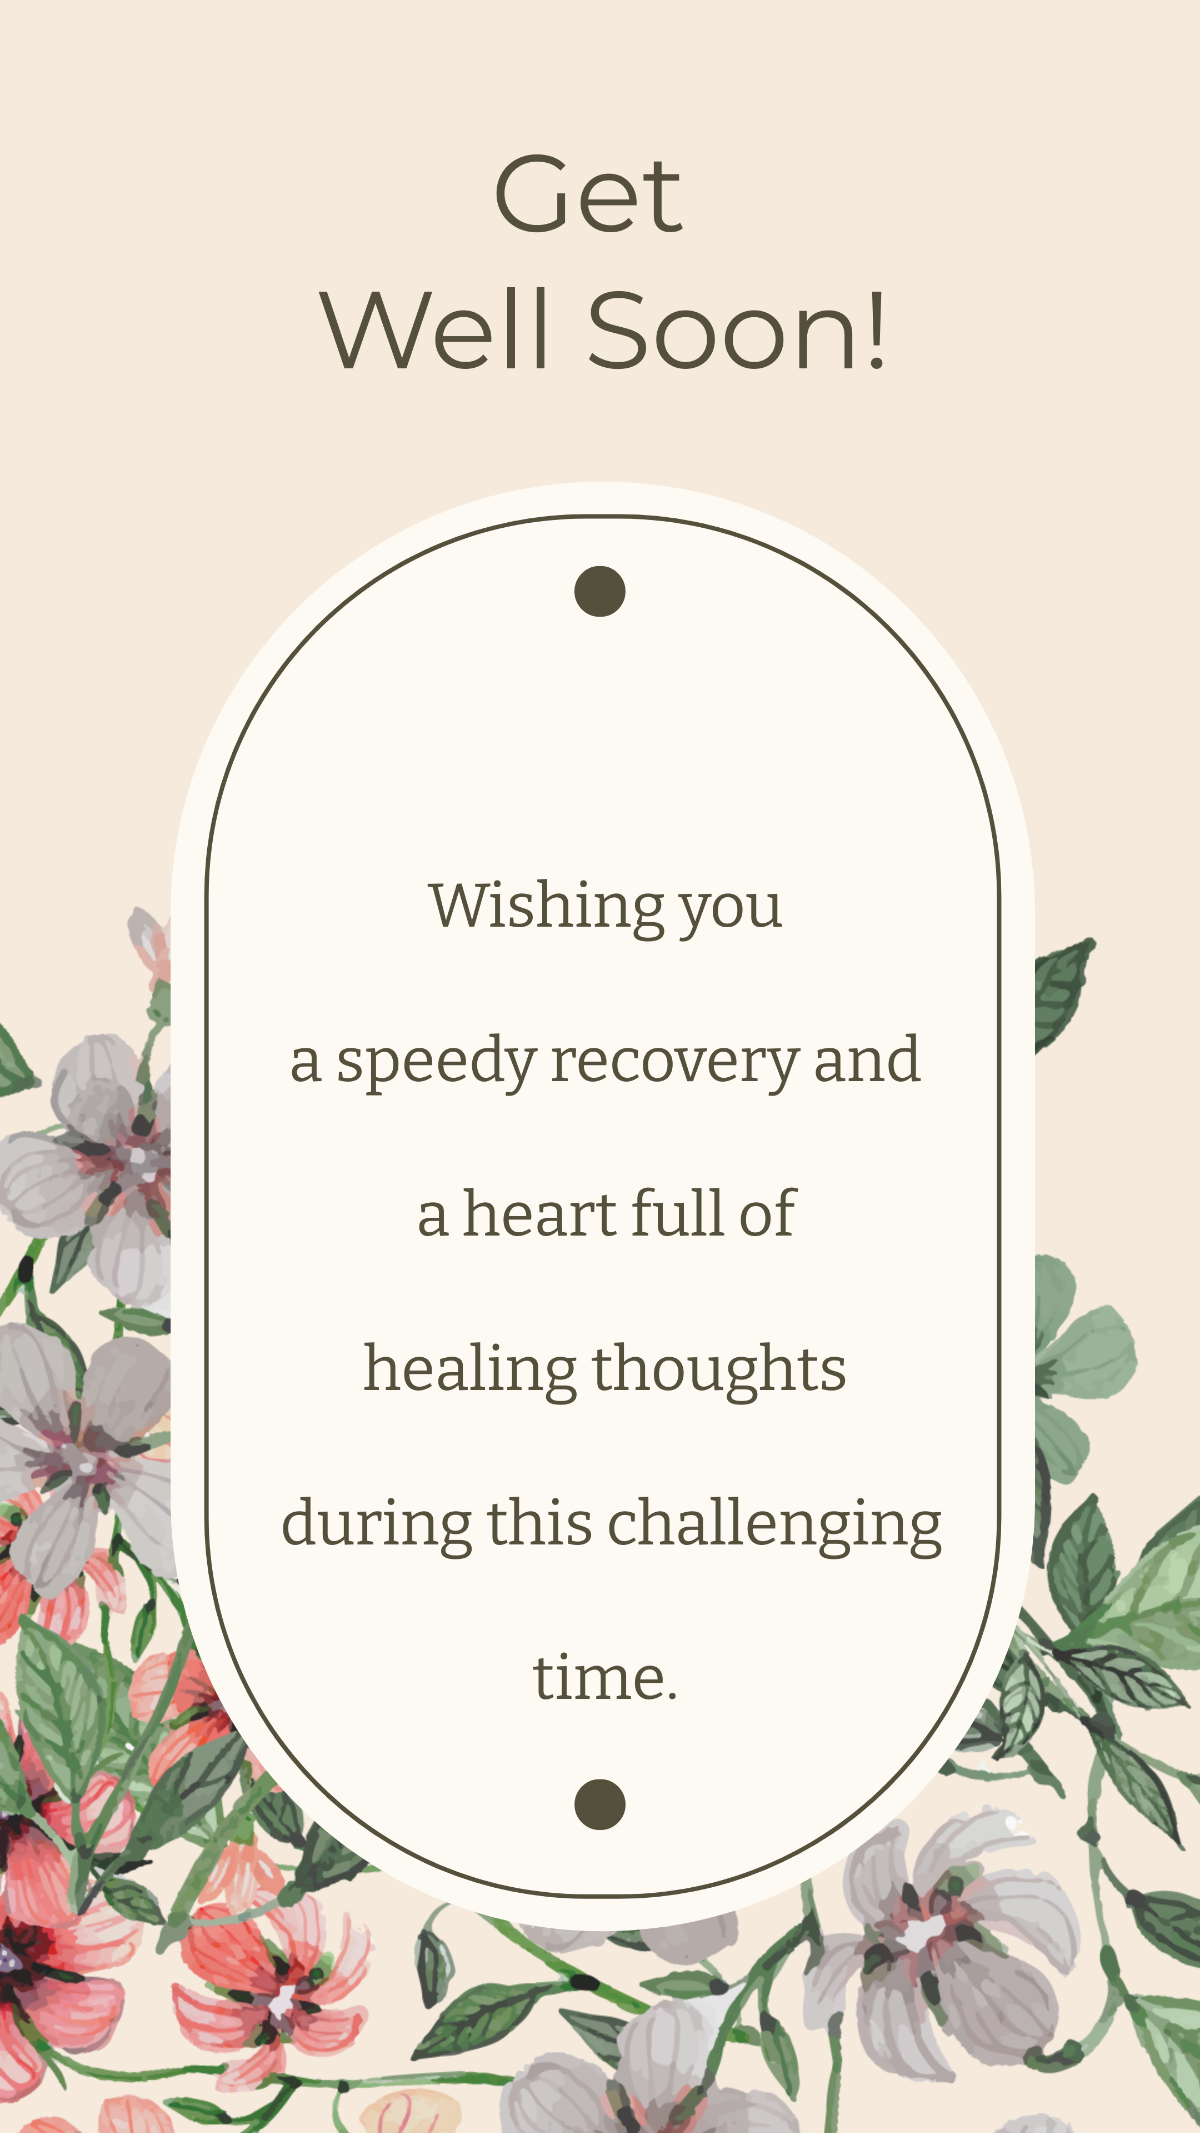 Get Well Soon Emotional Quote Template